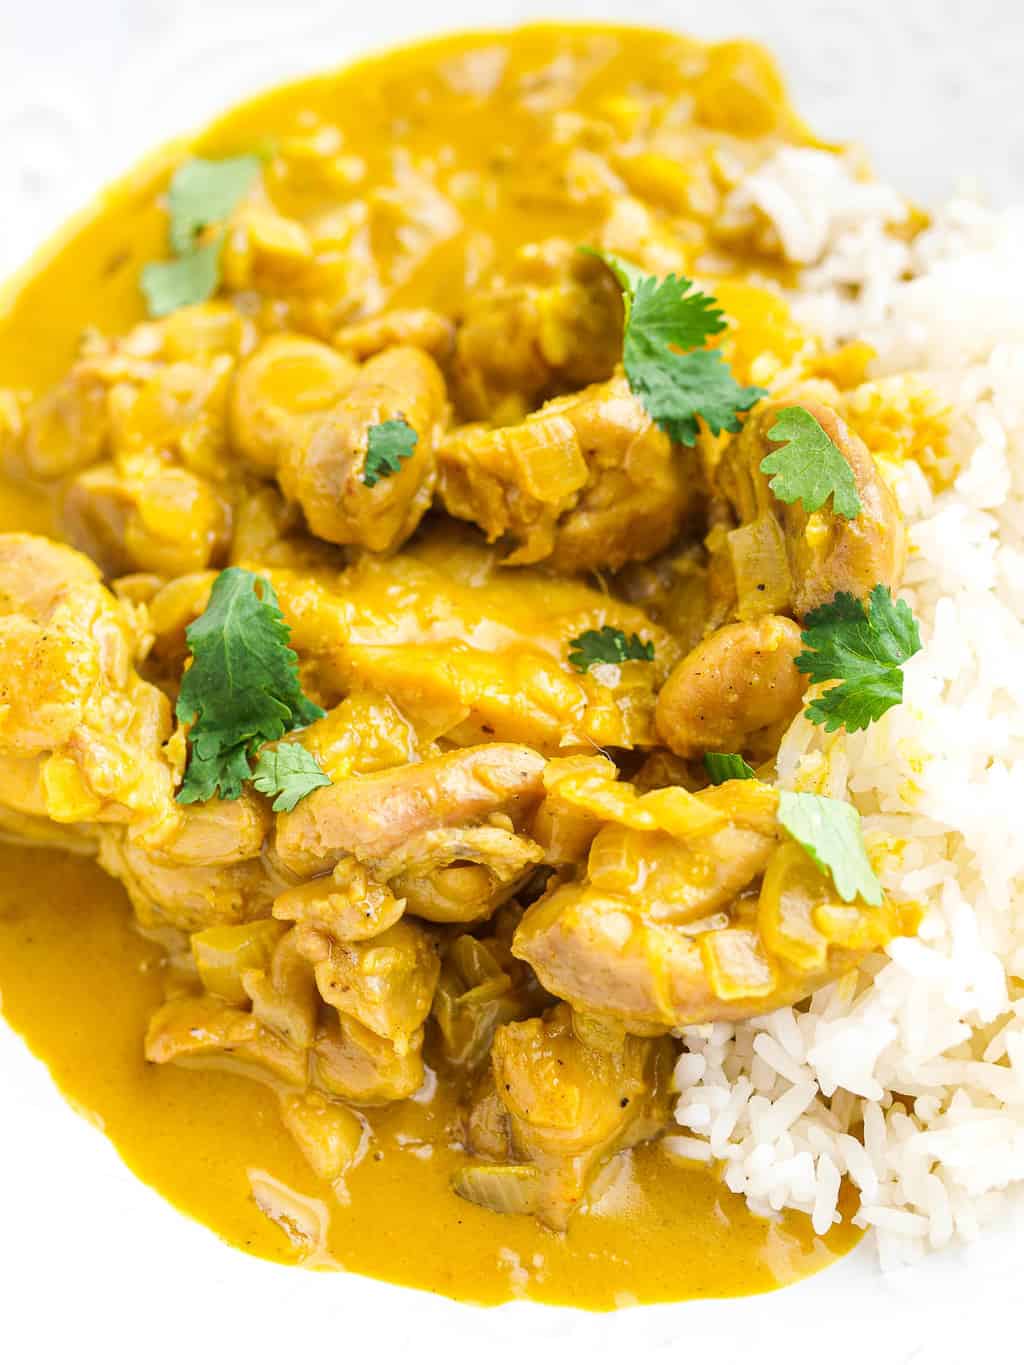 An up-close shot of a bowl of peanut butter chicken curry